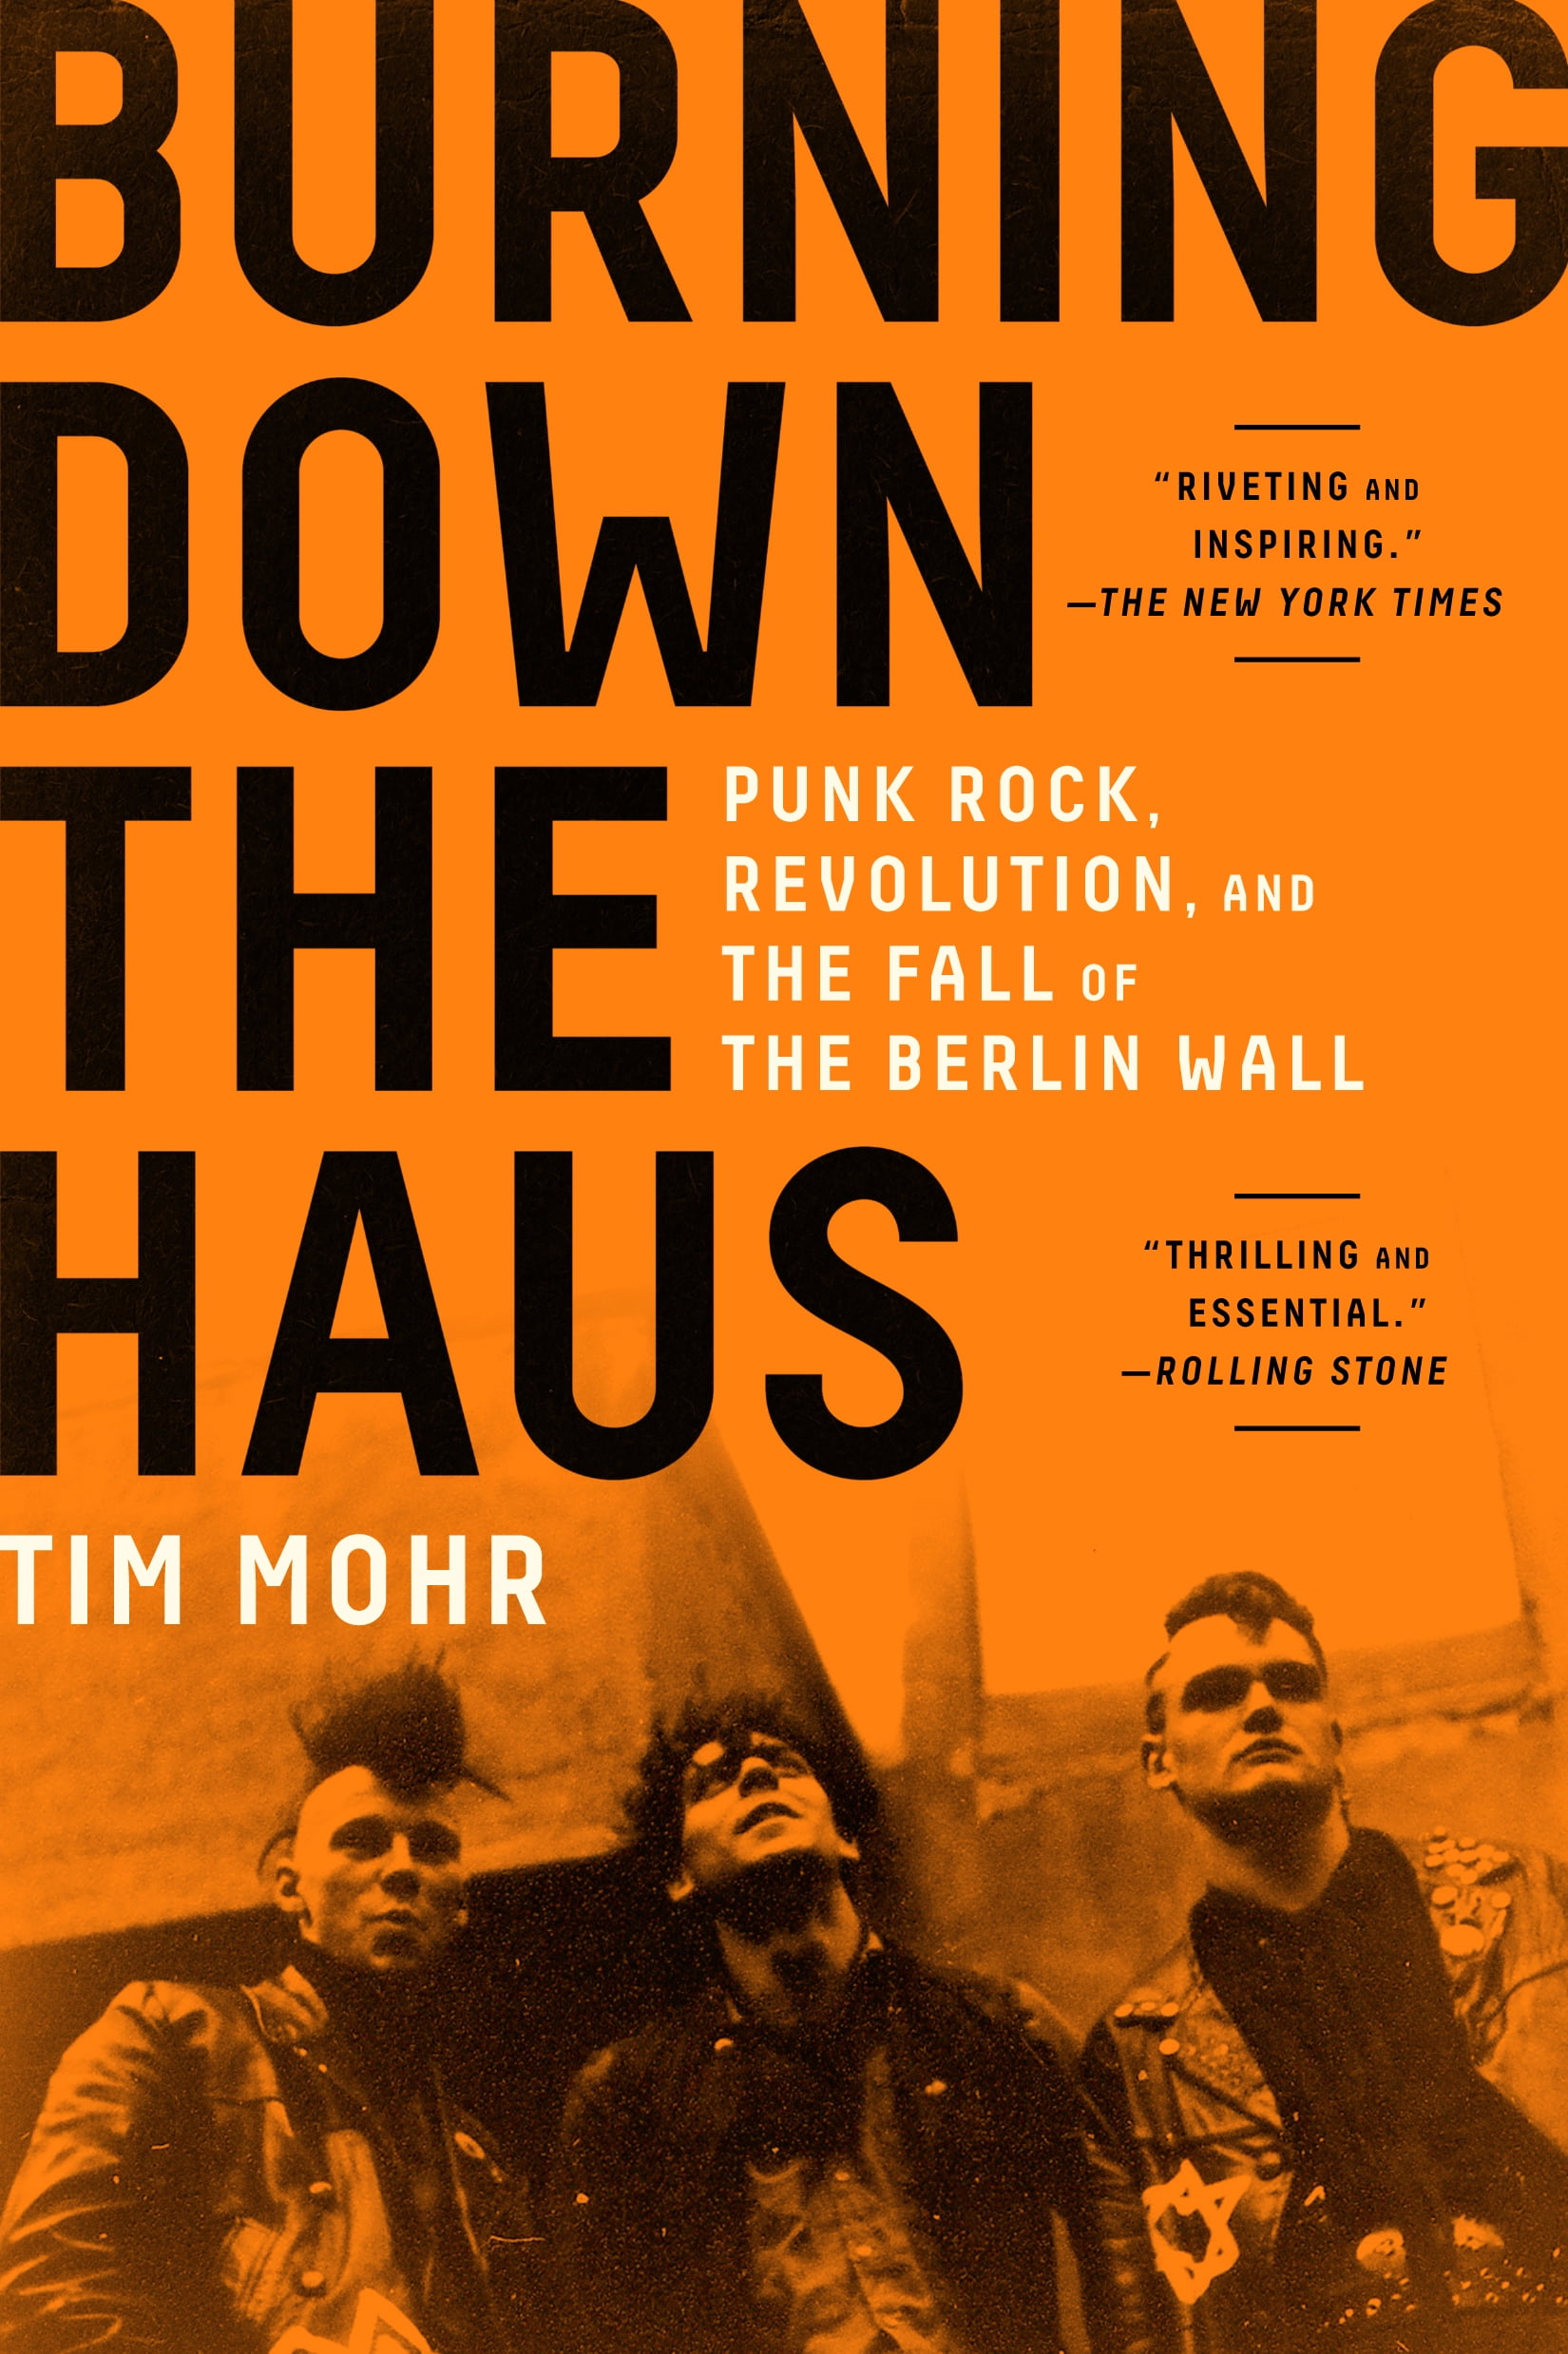 Burning-Down-the-Haus-Punk-Rock-Revolution-and-the-Fall-of-the-Berlin-Wall